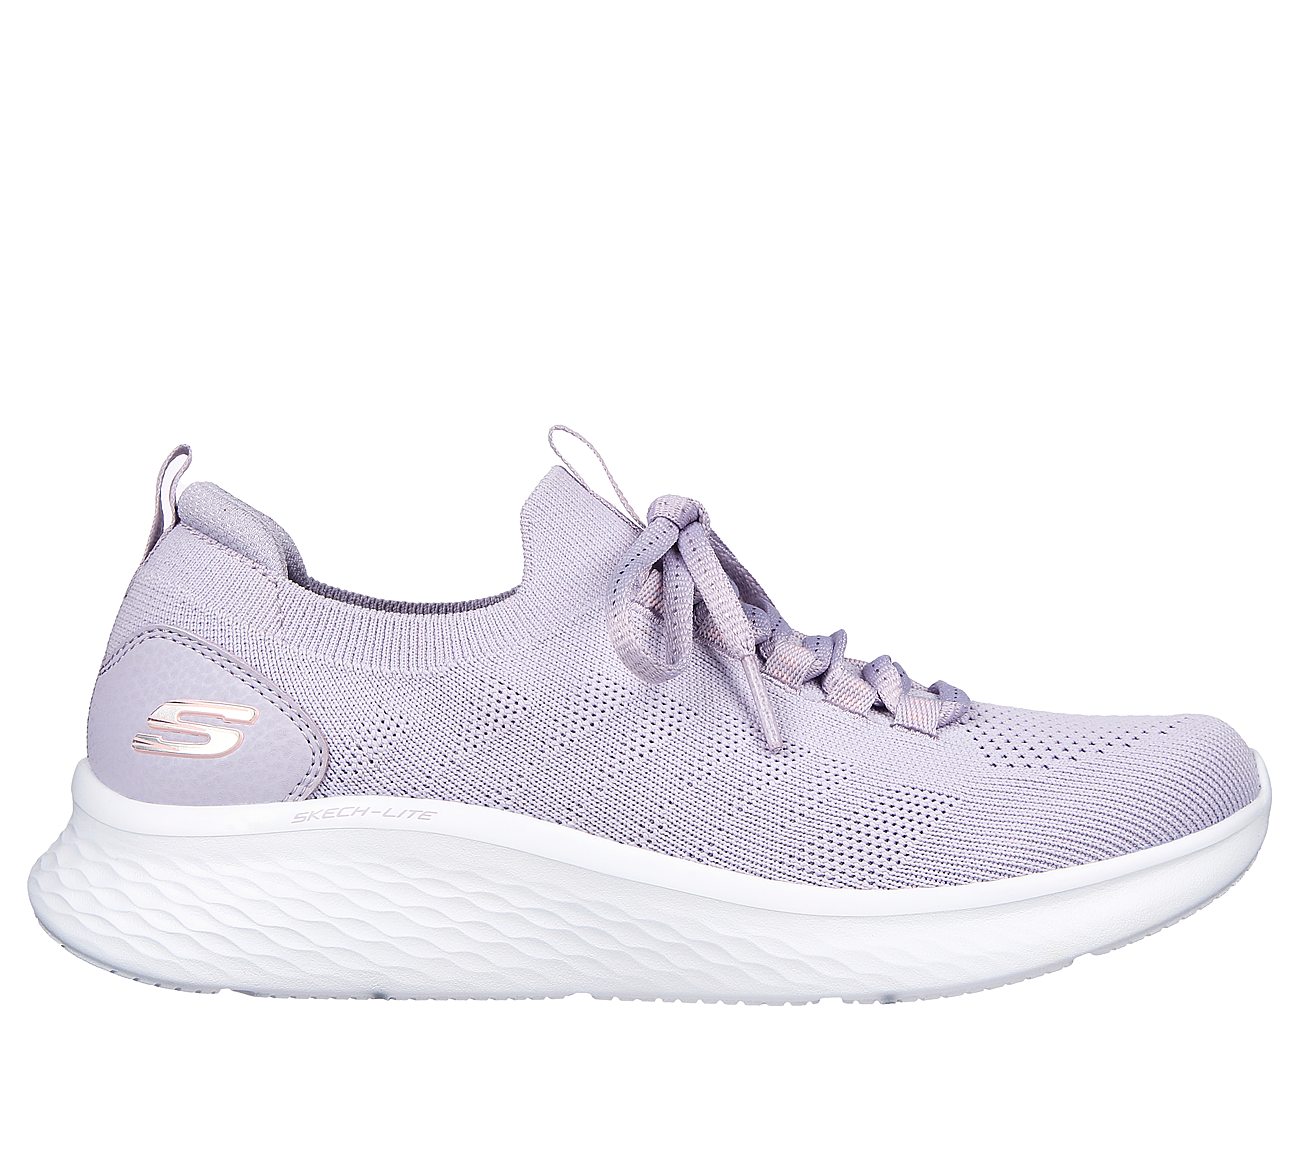 SKECH-LITE PRO-FULL NIGHT, LAVENDER/PINK Footwear Lateral View